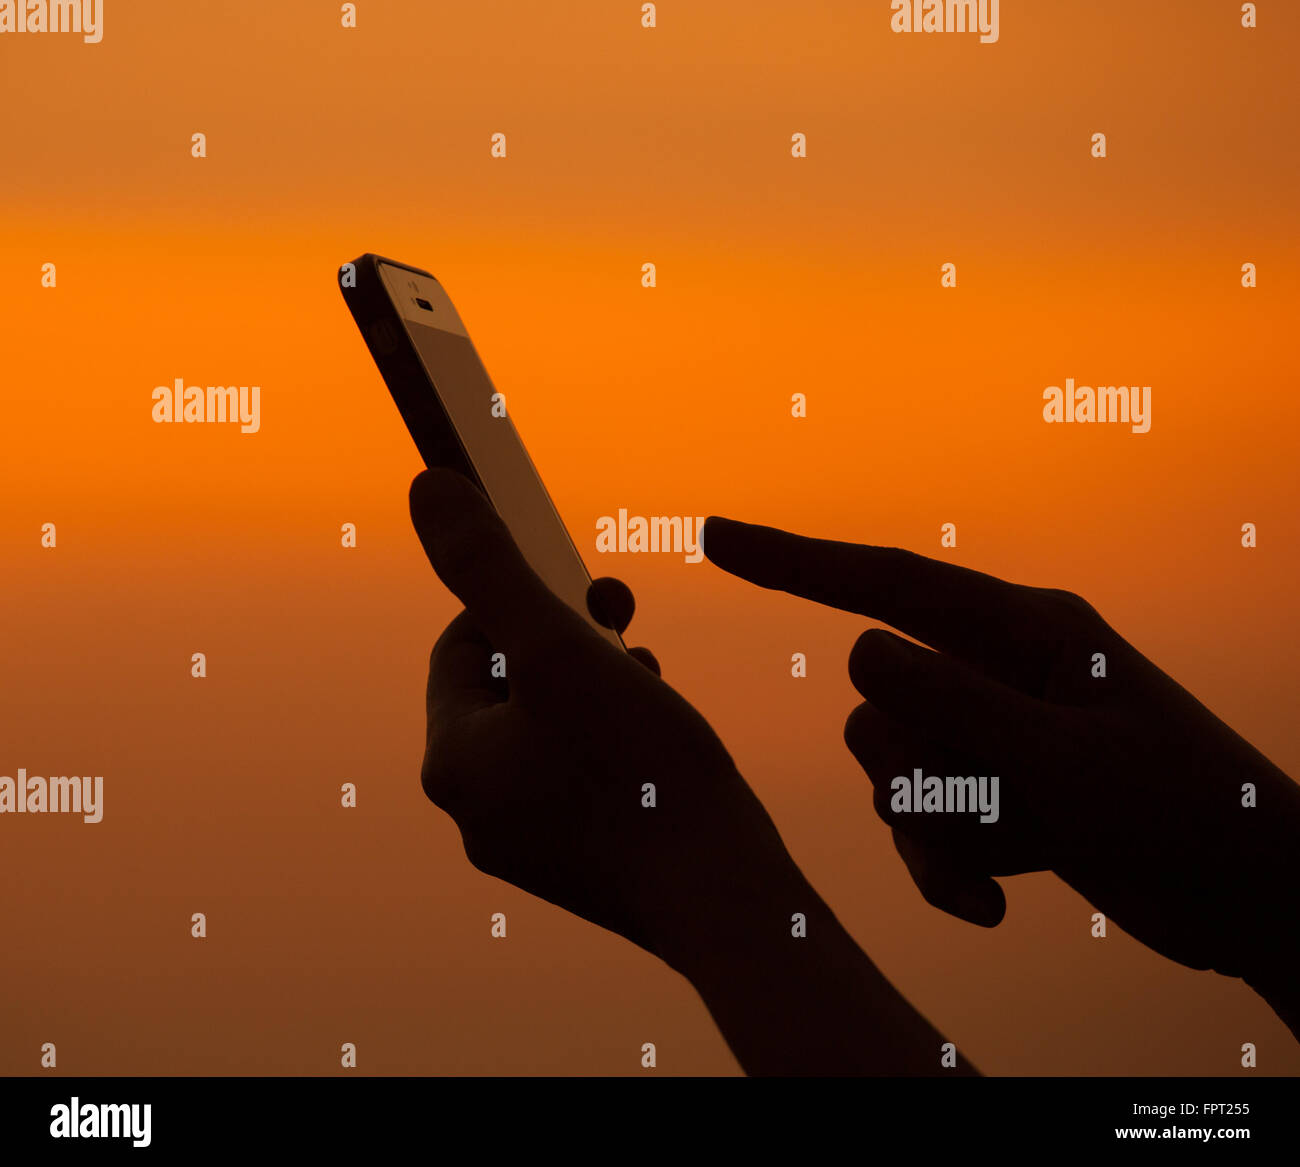 Silhouette of hand using mobile device at sunset Stock Photo